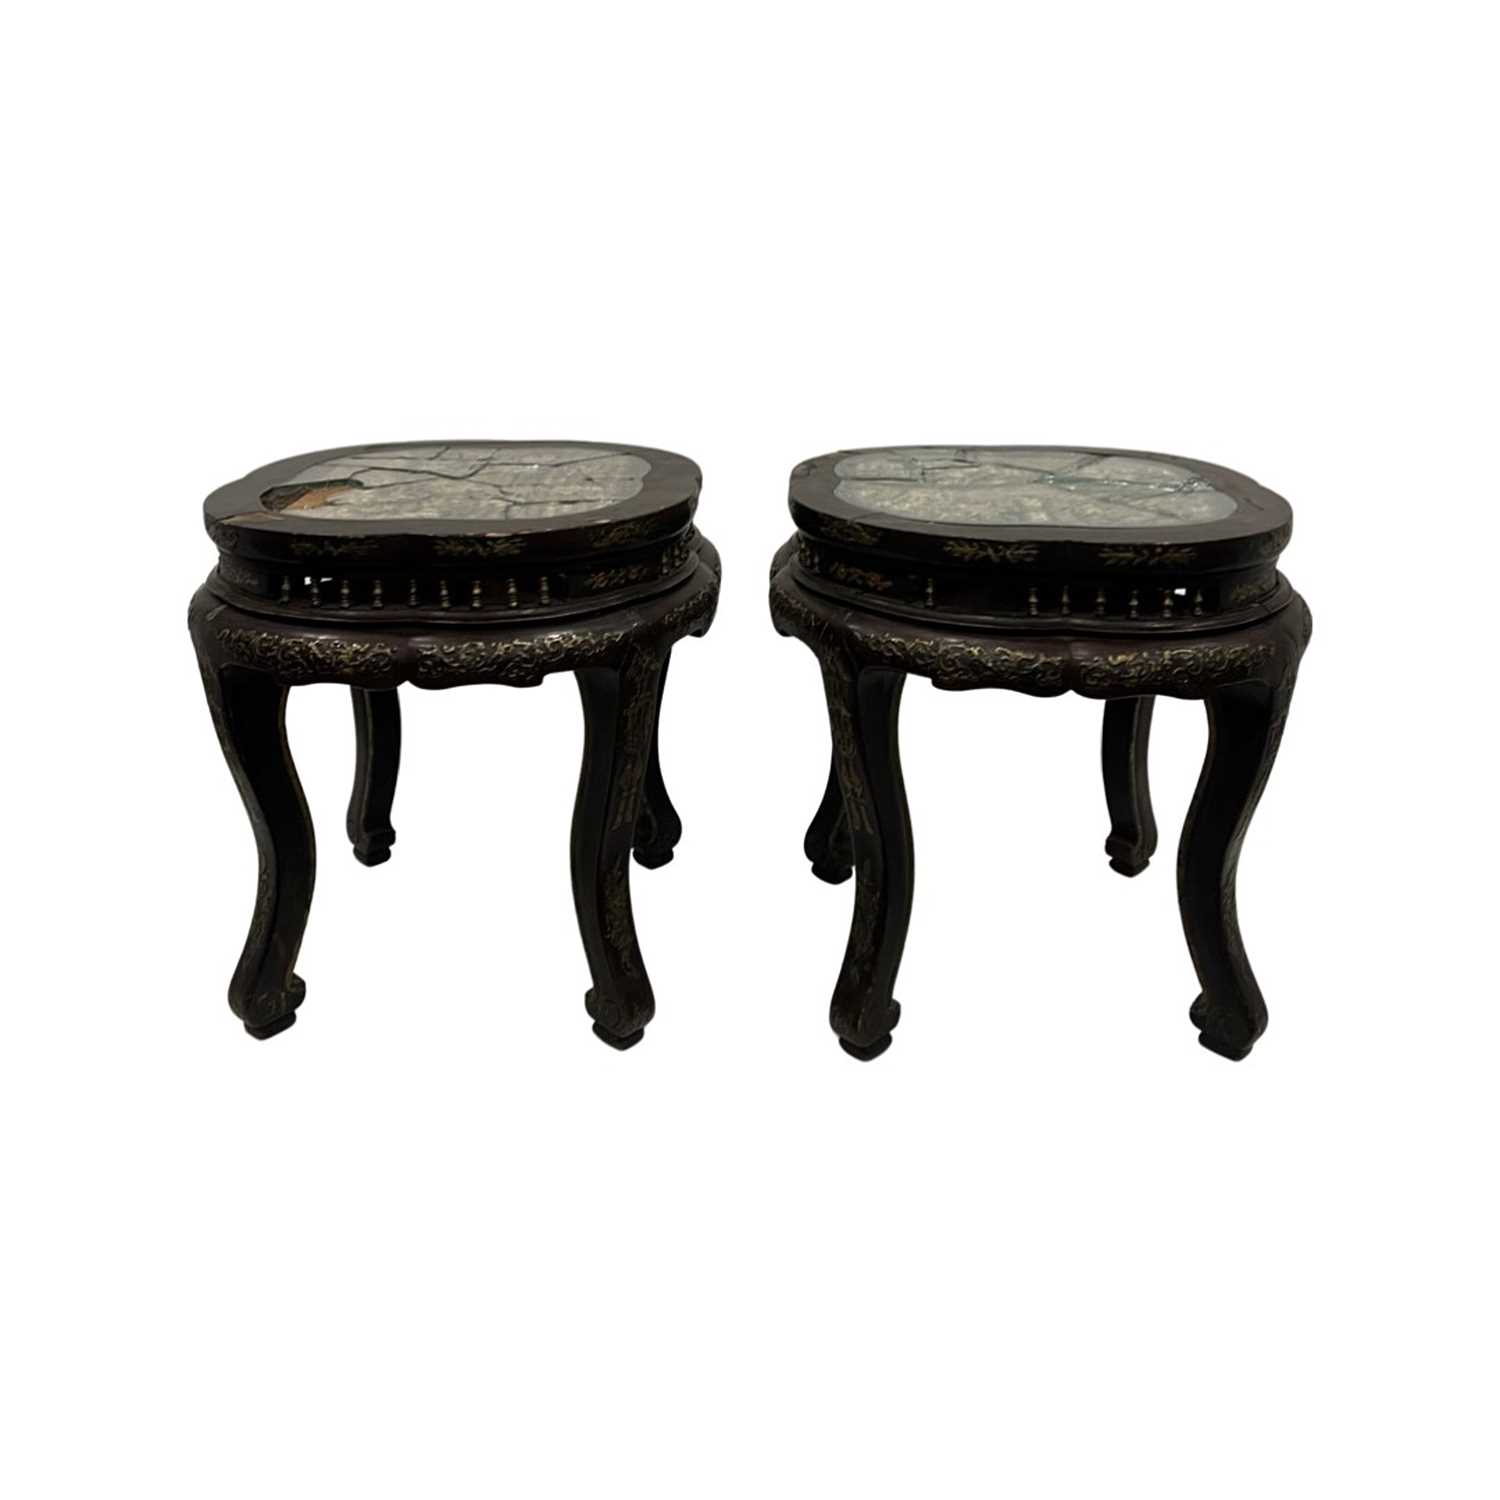 A PAIR OF 19TH CENTURY CHINESE CARVED HARDWOOD AND PARCEL GILT DECORATED STANDS - Image 2 of 5